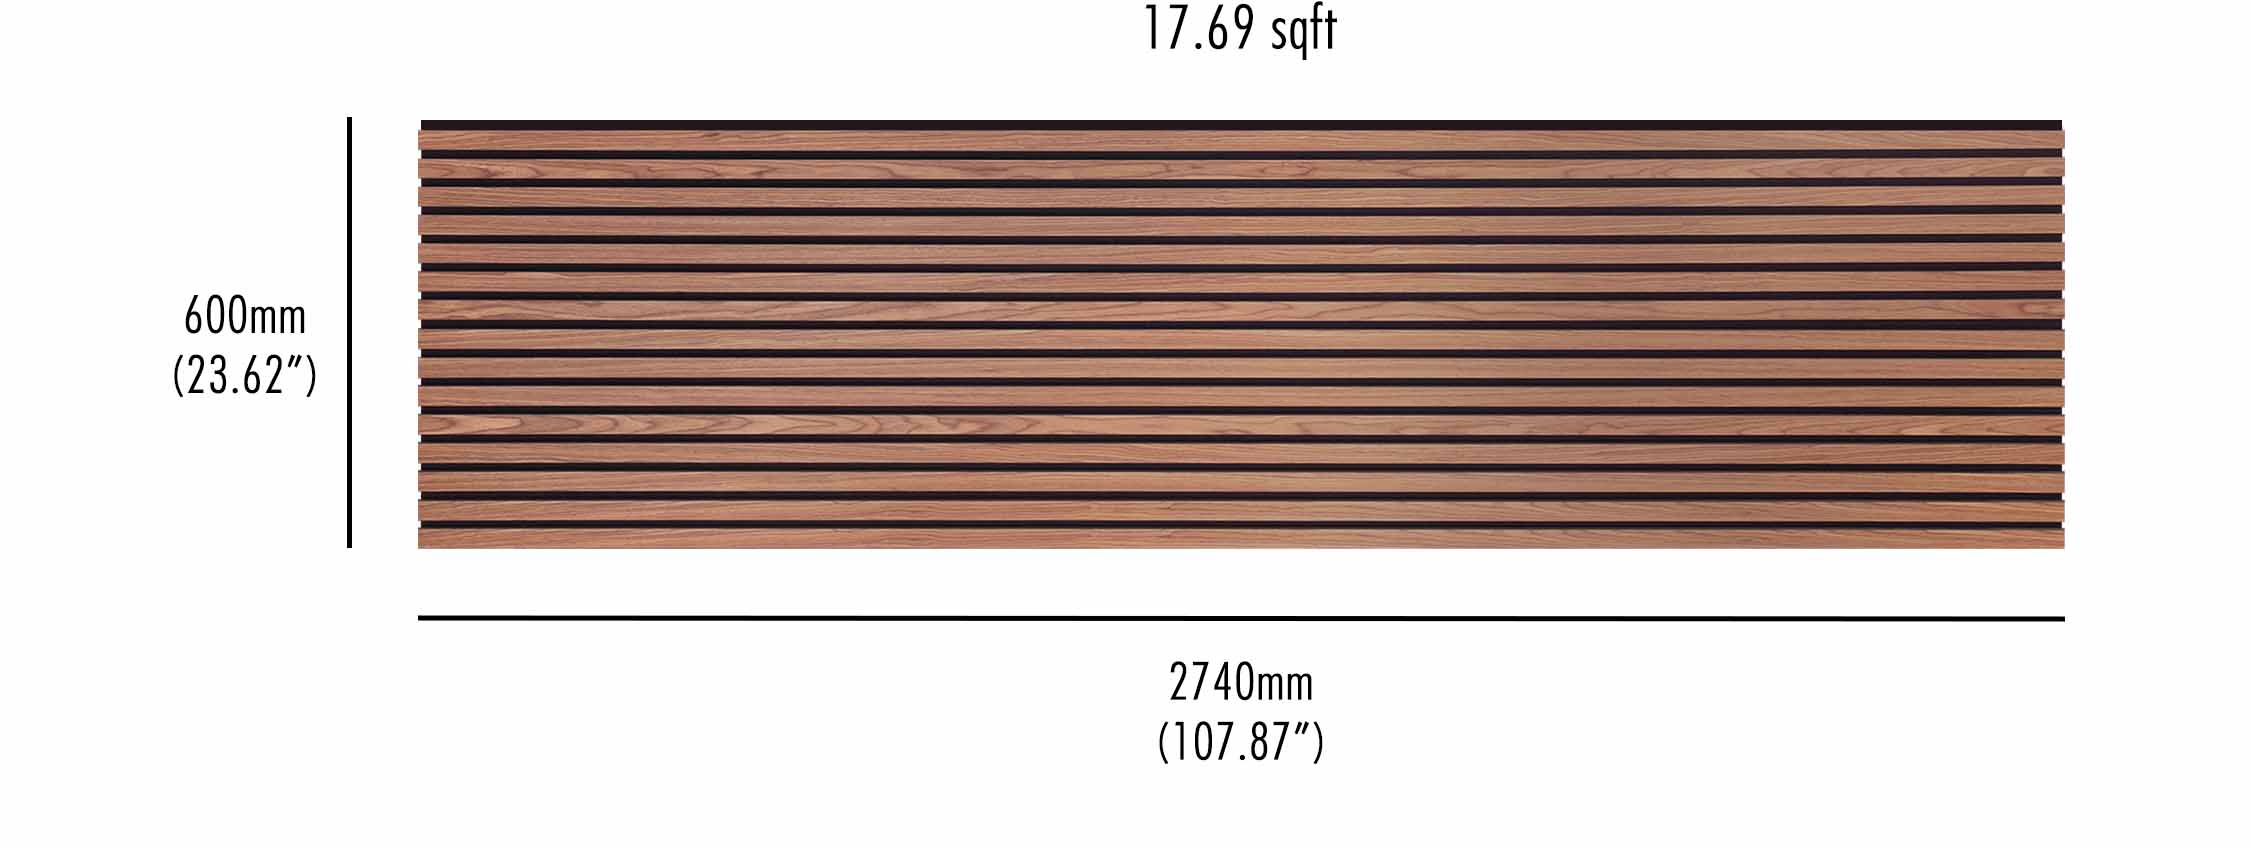 A diagram showcasing the dimensions of horizontal walnut wall panels, with measurements of 600mm height and 2740mm width, totalling 17.69 square feet.